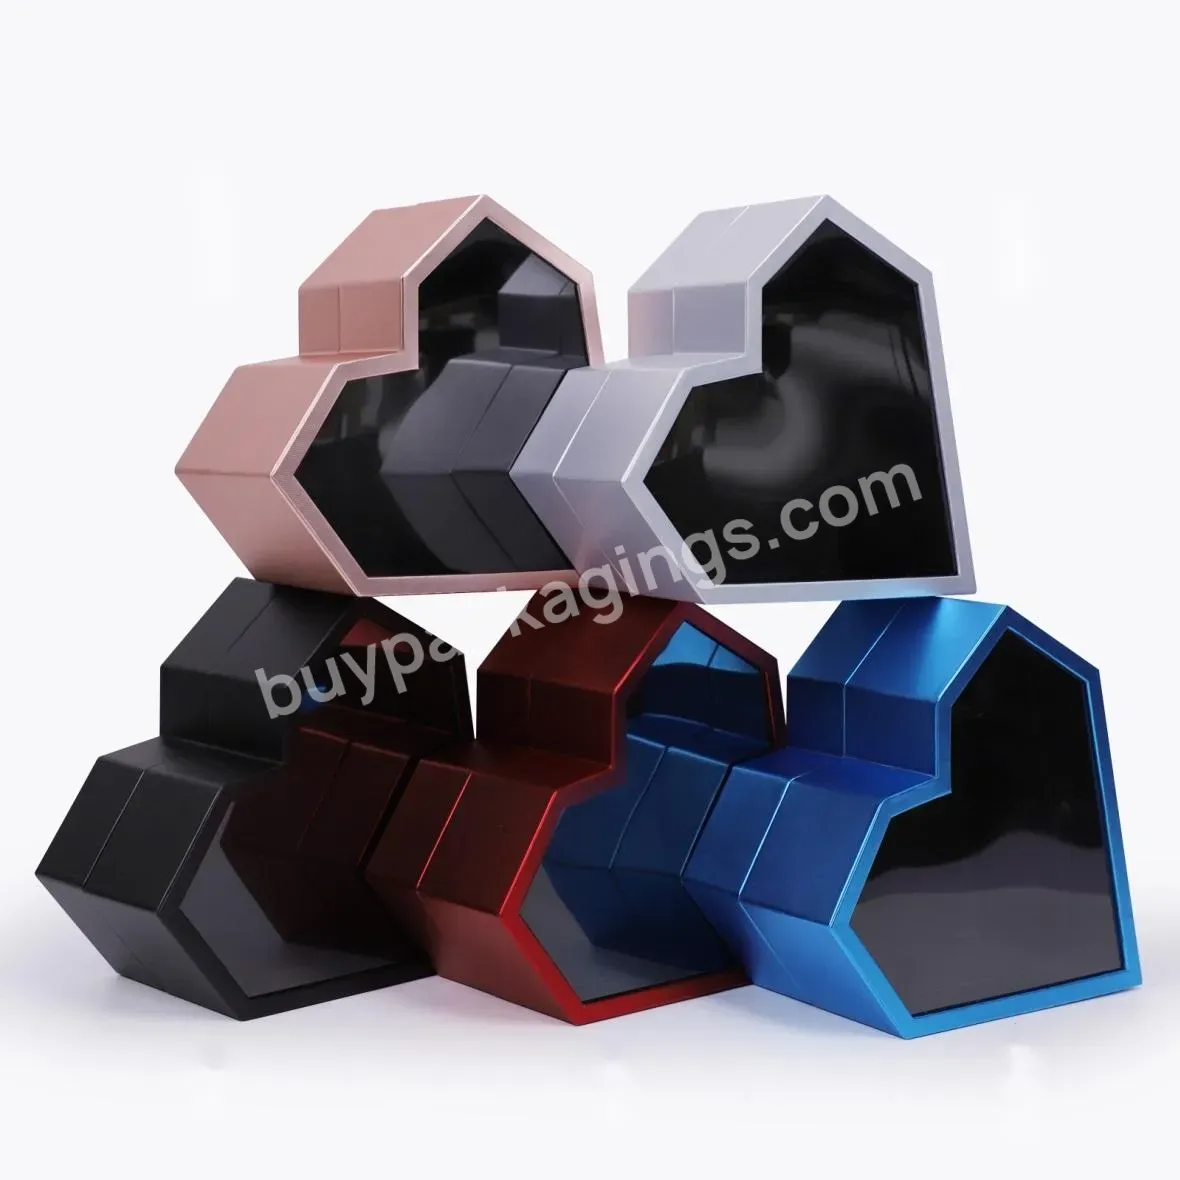 Luxury Surface Heavy Metallic Finished Gift Box Heart Shaped Flower Box With Transparent Cover - Buy Surface Heavy Metallic Finished Gift Box,Heart Shaped Flower Box,Flower Box With Transparent Cover.